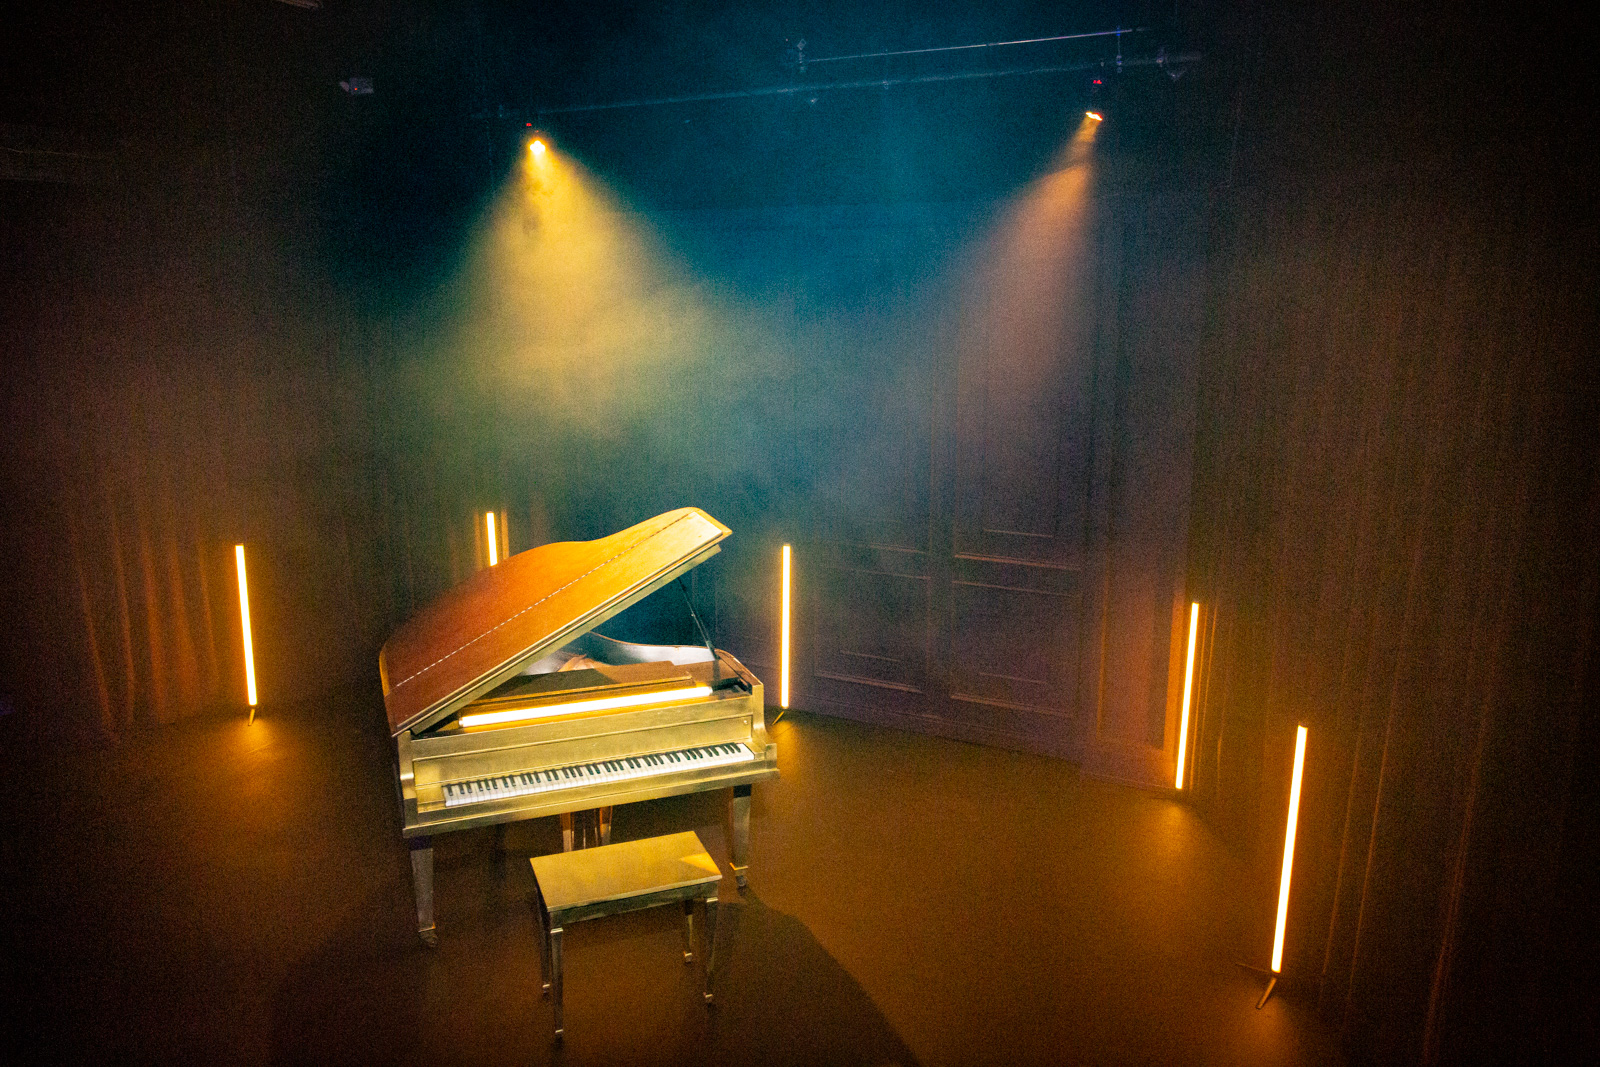 Music Video Piano Set for Filming in LA